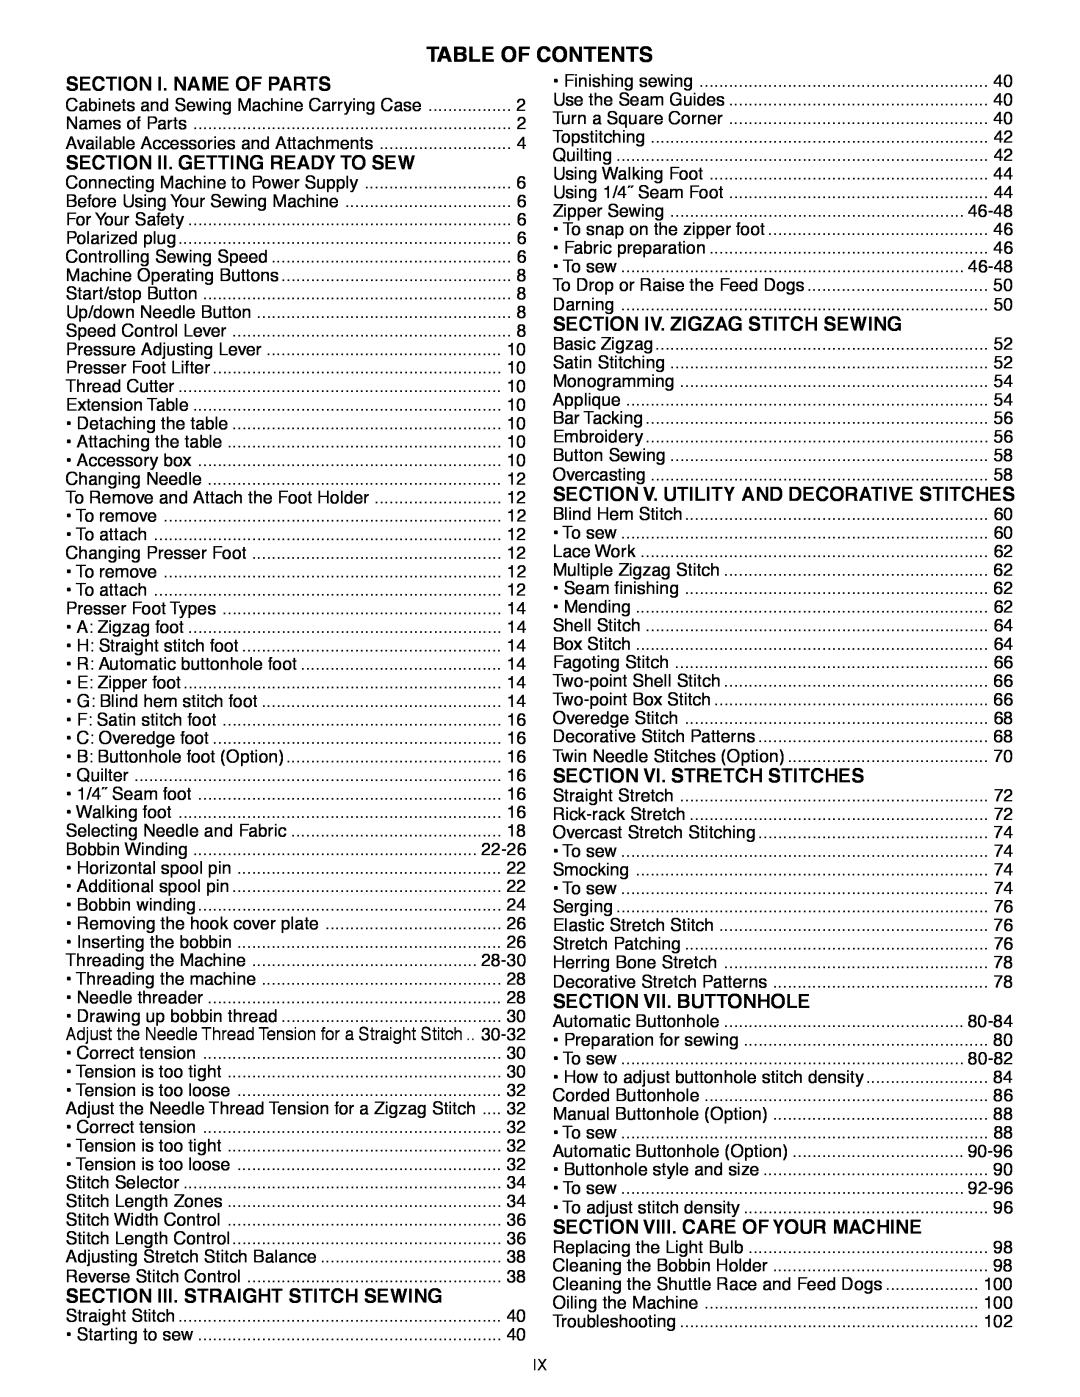 Janome MS-5027 Table Of Contents, Section I. Name Of Parts, Section Ii. Getting Ready To Sew, Section Vi. Stretch Stitches 